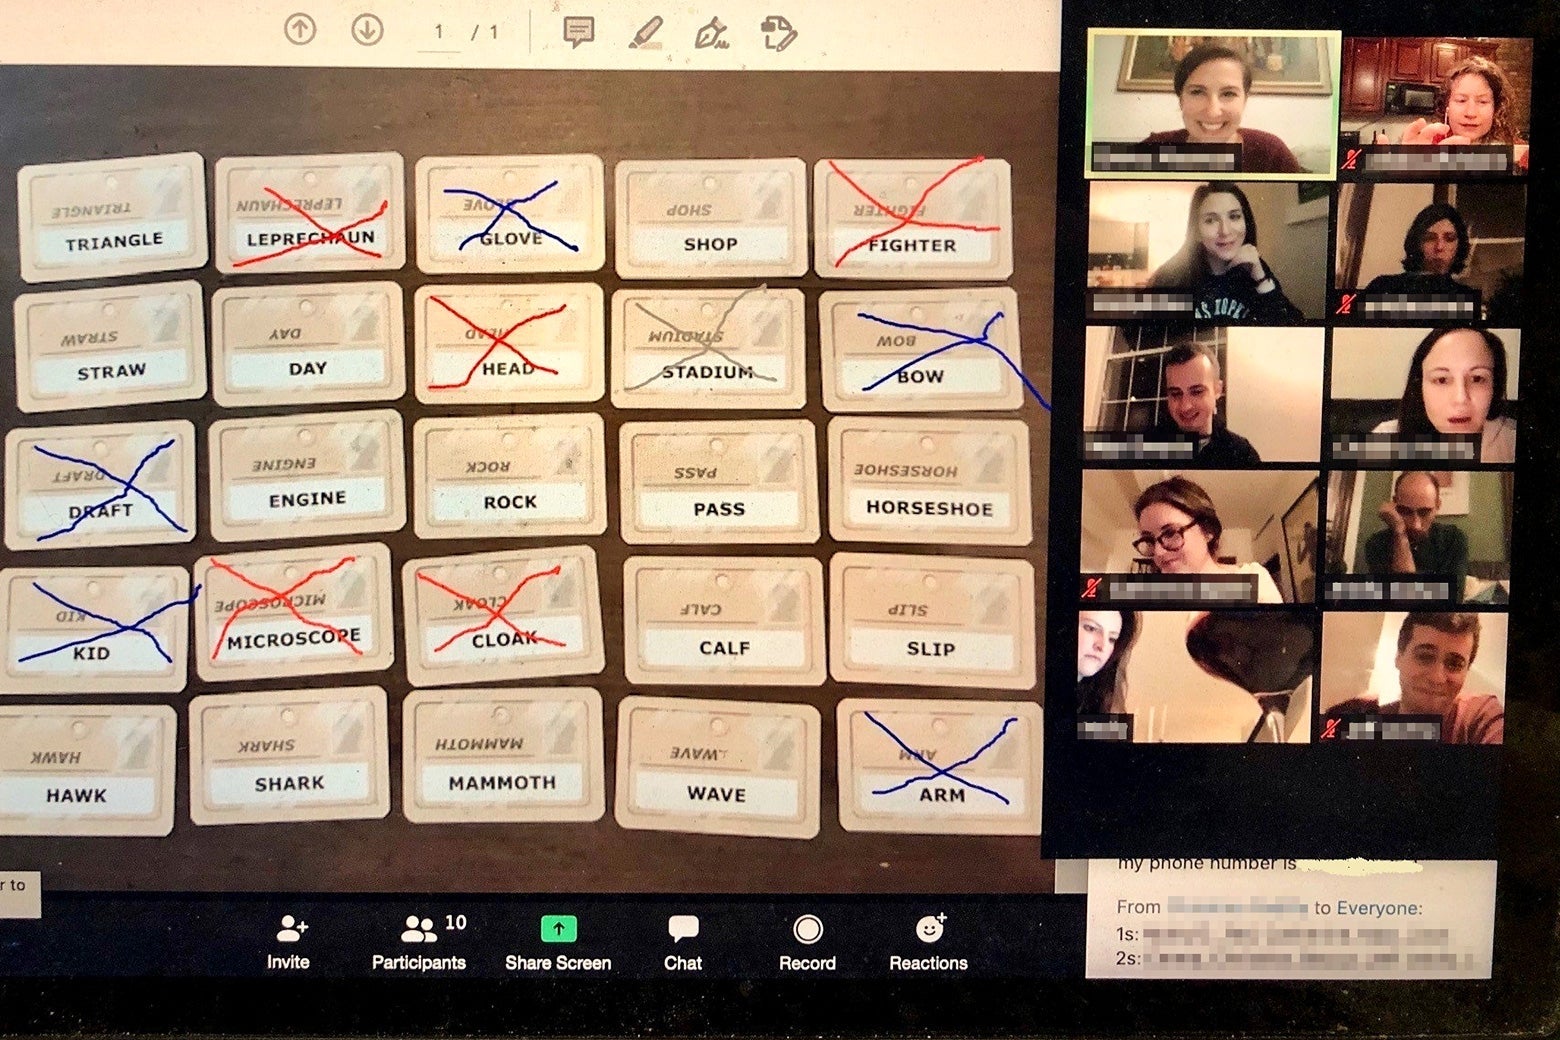 A photo of a laptop screen with a Zoom video conference on it, the largest square featuring cards laid out for the game Codenames and the smaller squares featuring players' faces.